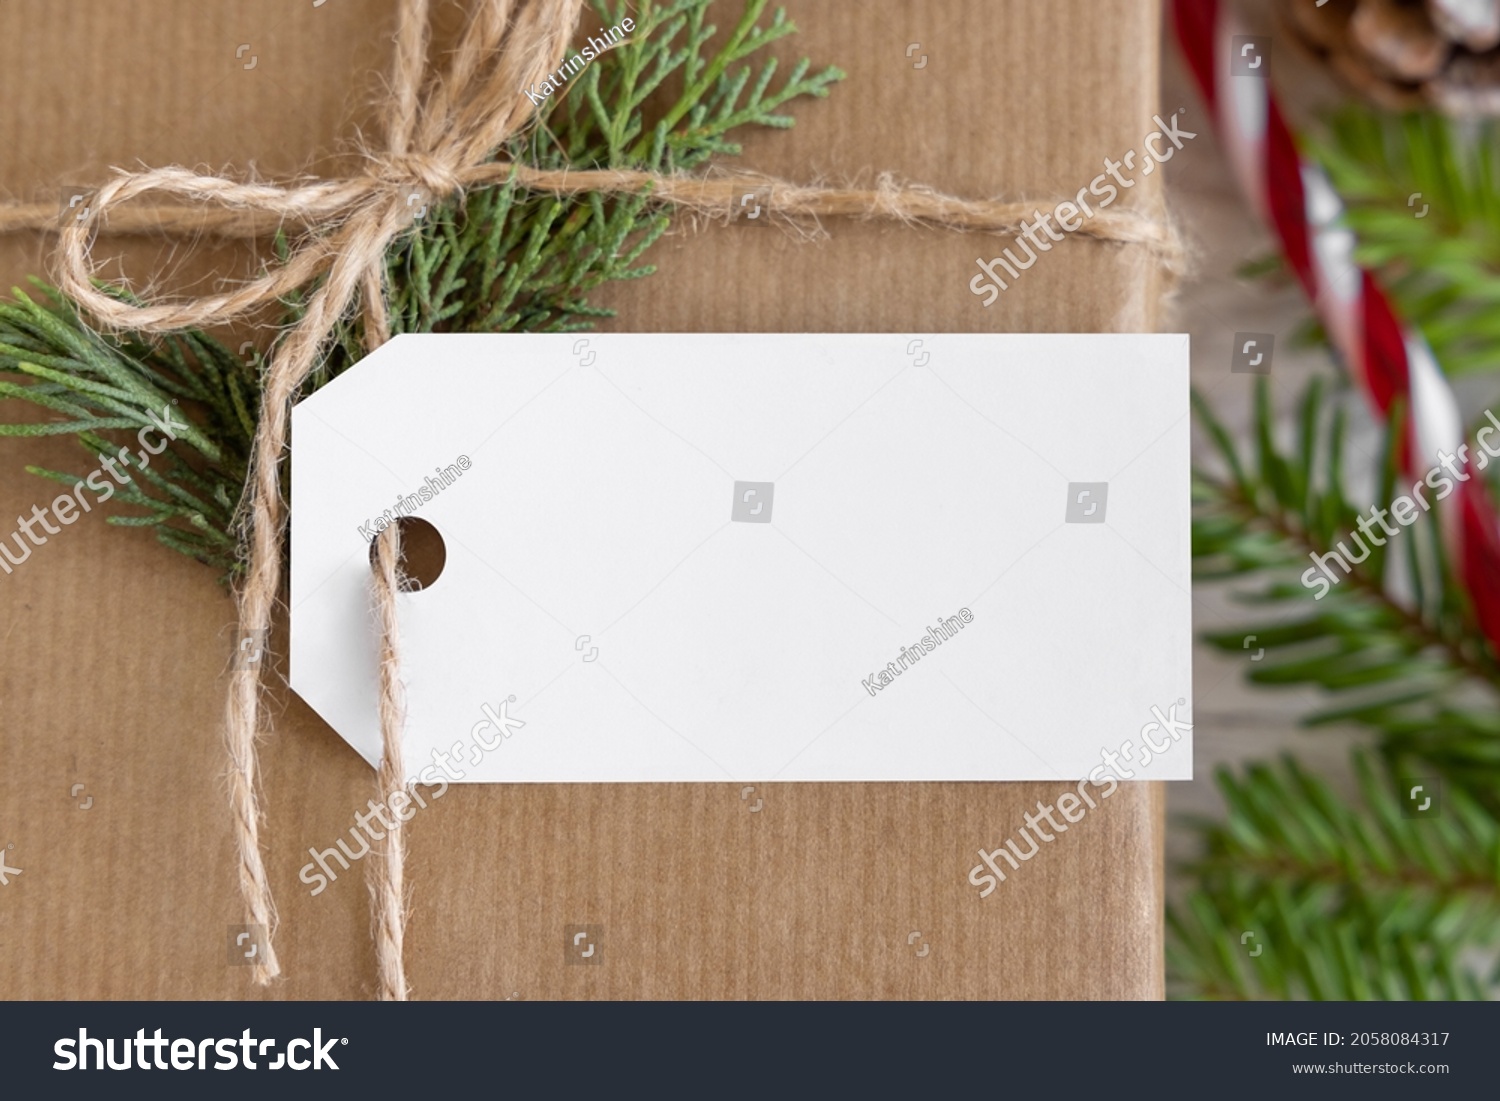 Christmas wrapped present with paper gift tag with fir tree branches, pine cones and holiday decorations close up. Rustic winter composition with blank Gift tag Mockup, copy space, flat lay #2058084317